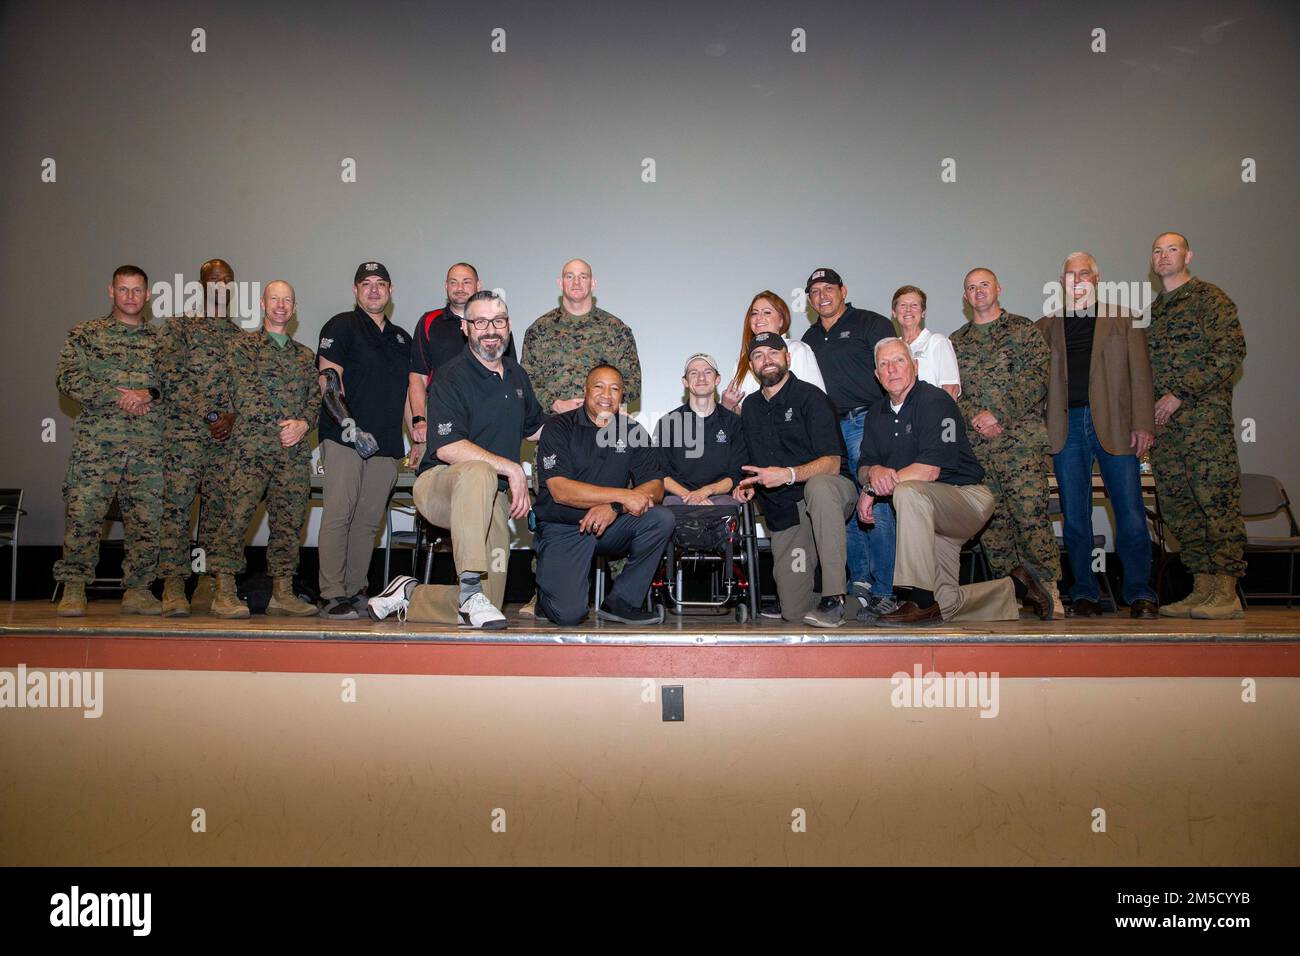 U.S. Marine Corps Sgt. Maj. Troy E. Black, the 19th Sergeant Major of the Marine Corps, poses for a group photo with veterans at a Troops First town hall at Marine Air Ground Combat Center, Twentynine Palms, California, March 2, 2022. The Sergeant Major of the Marine Corps spoke to Marines about talent management, force design, human performance and the importance of staying connected. The Troops First Foundation was created to develop, operate and support wellness, quality of life and event-based initiatives for post-9/11 combat-injured warriors. Stock Photo